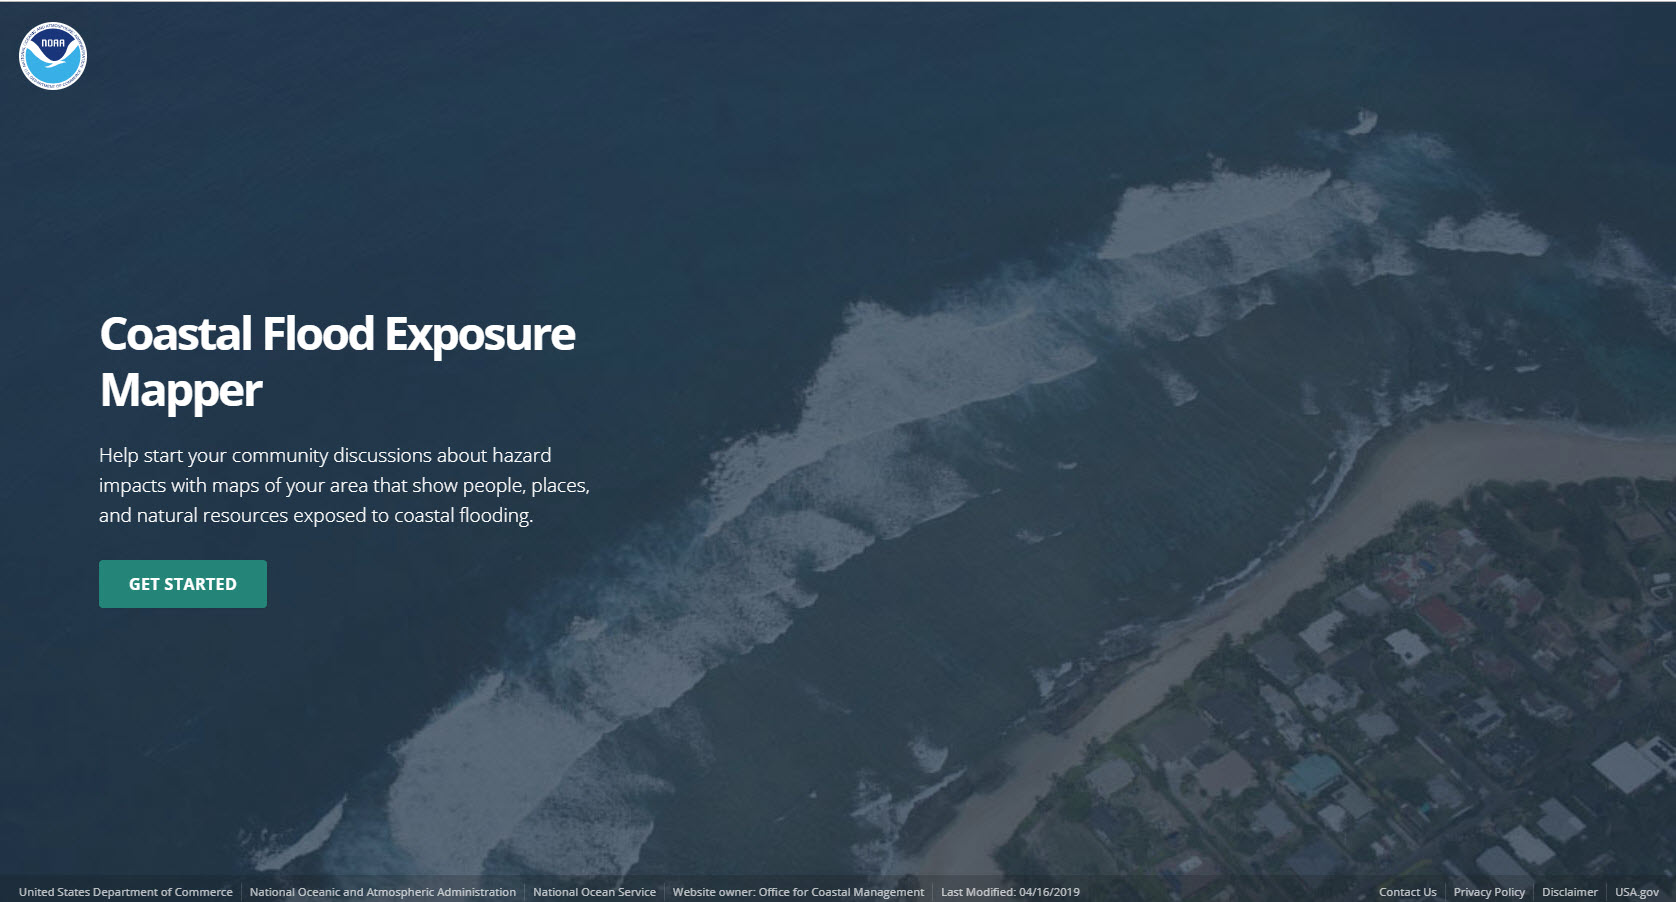 A screenshot of the tool, Coastal Flood Exposure Mapper, being used.